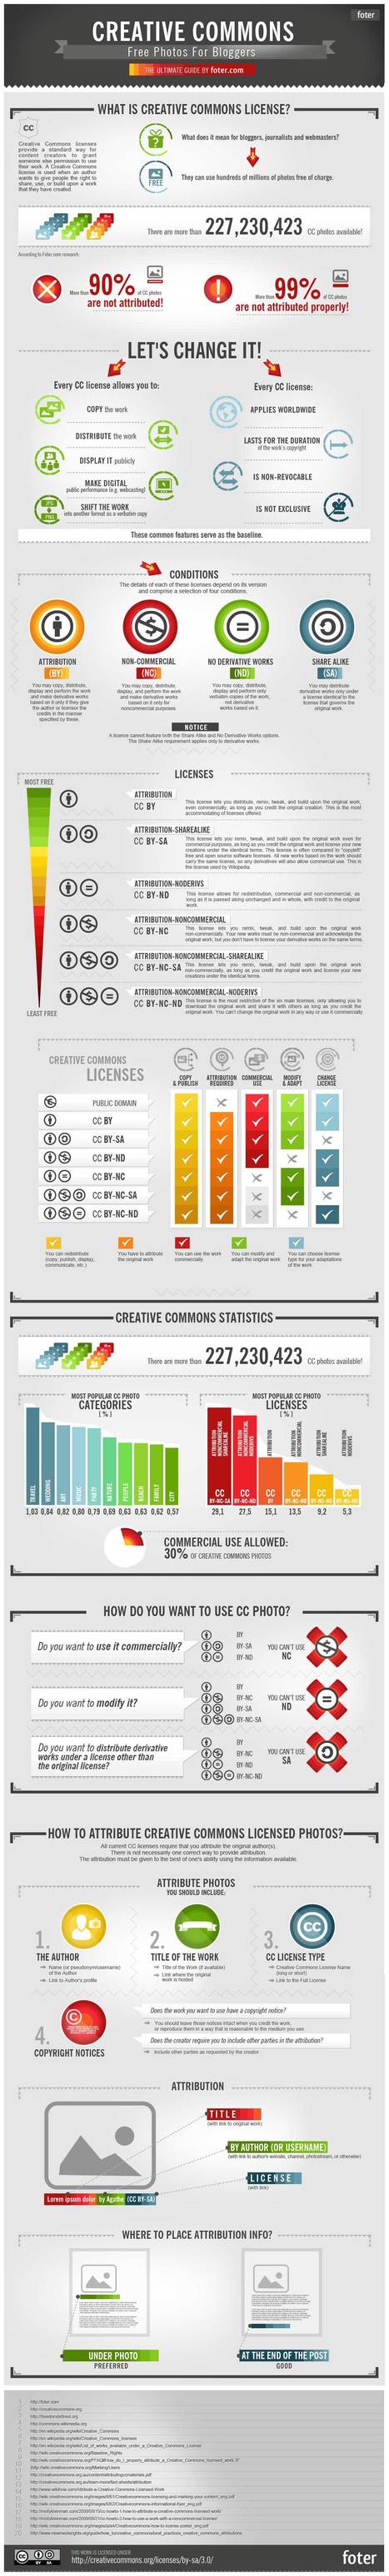 CreativeCommons-Infographic | 21st Century Learning and Teaching | Scoop.it